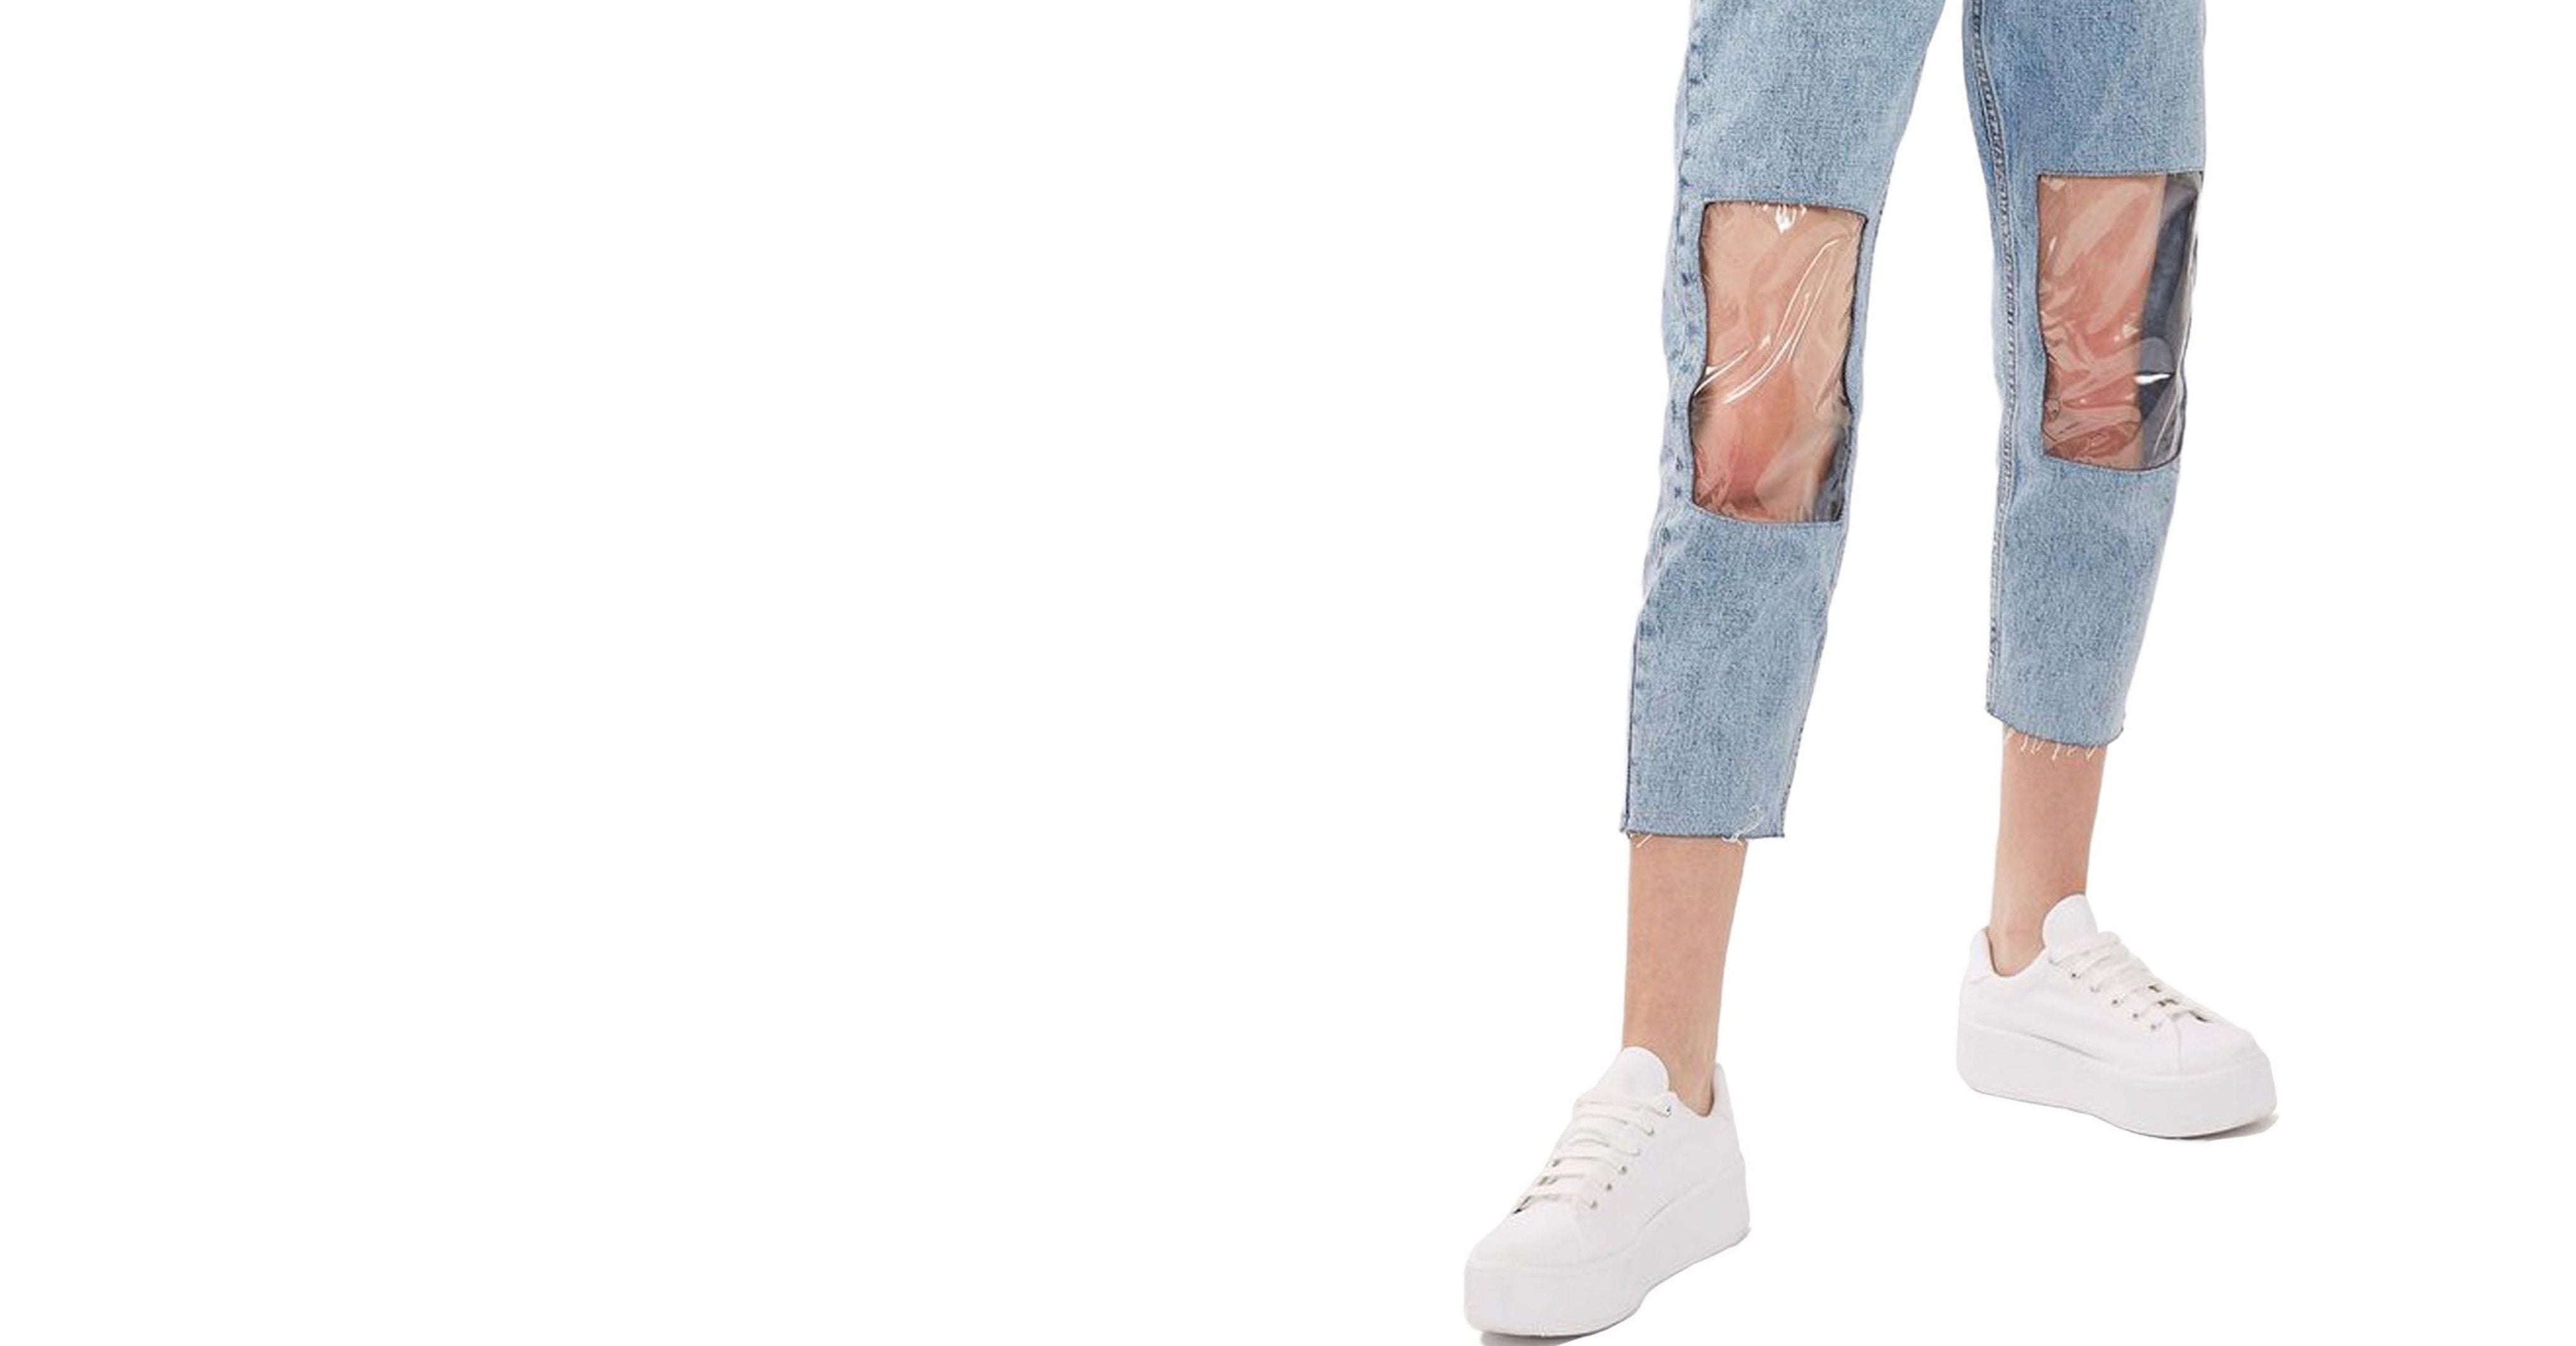 Topshop is back with more clear plastic jeans